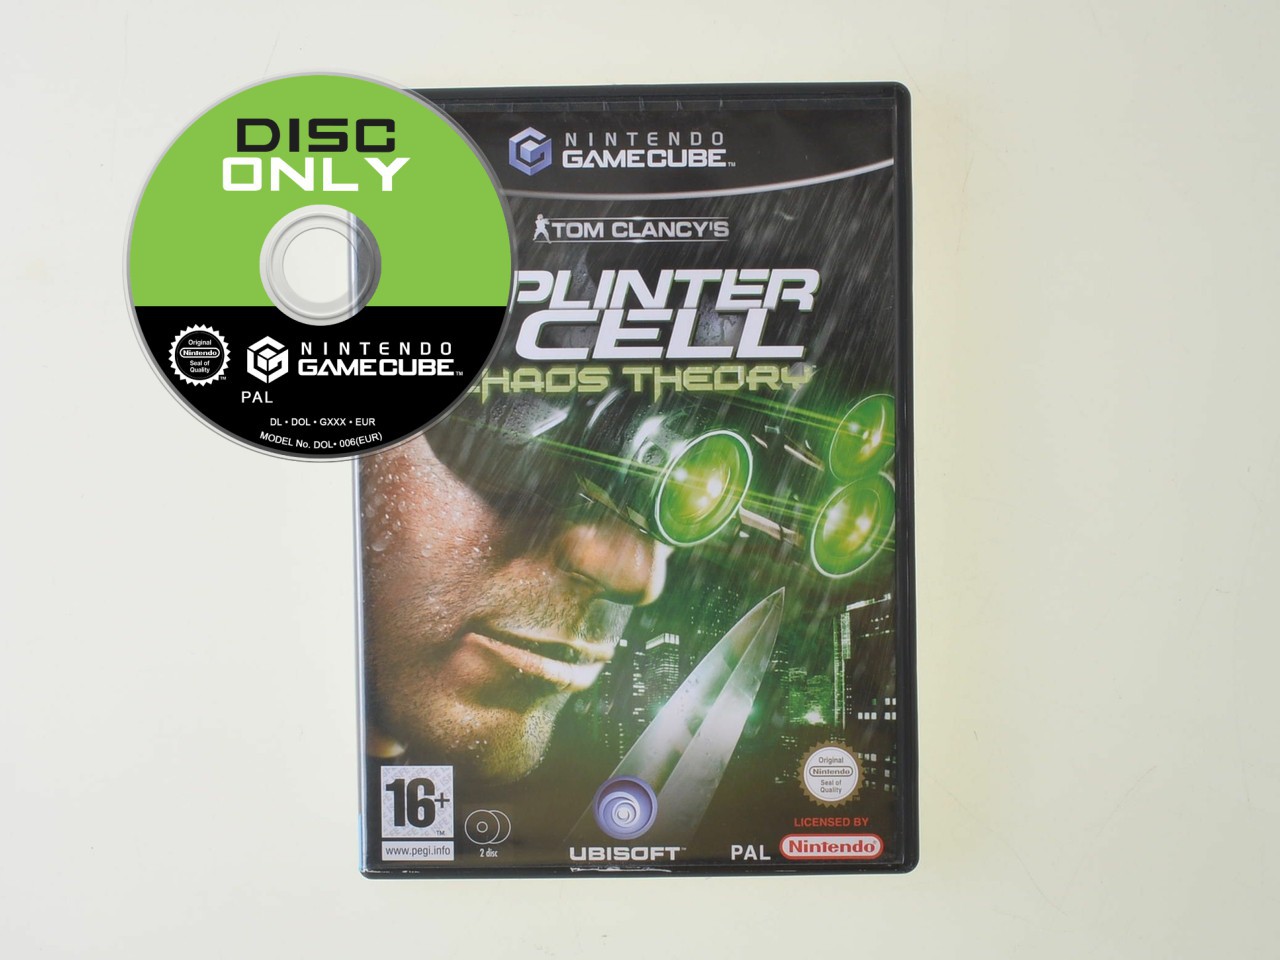 Tom Clancy's Splinter Cell Chaos Theory - Disc Only Kopen | Gamecube Games